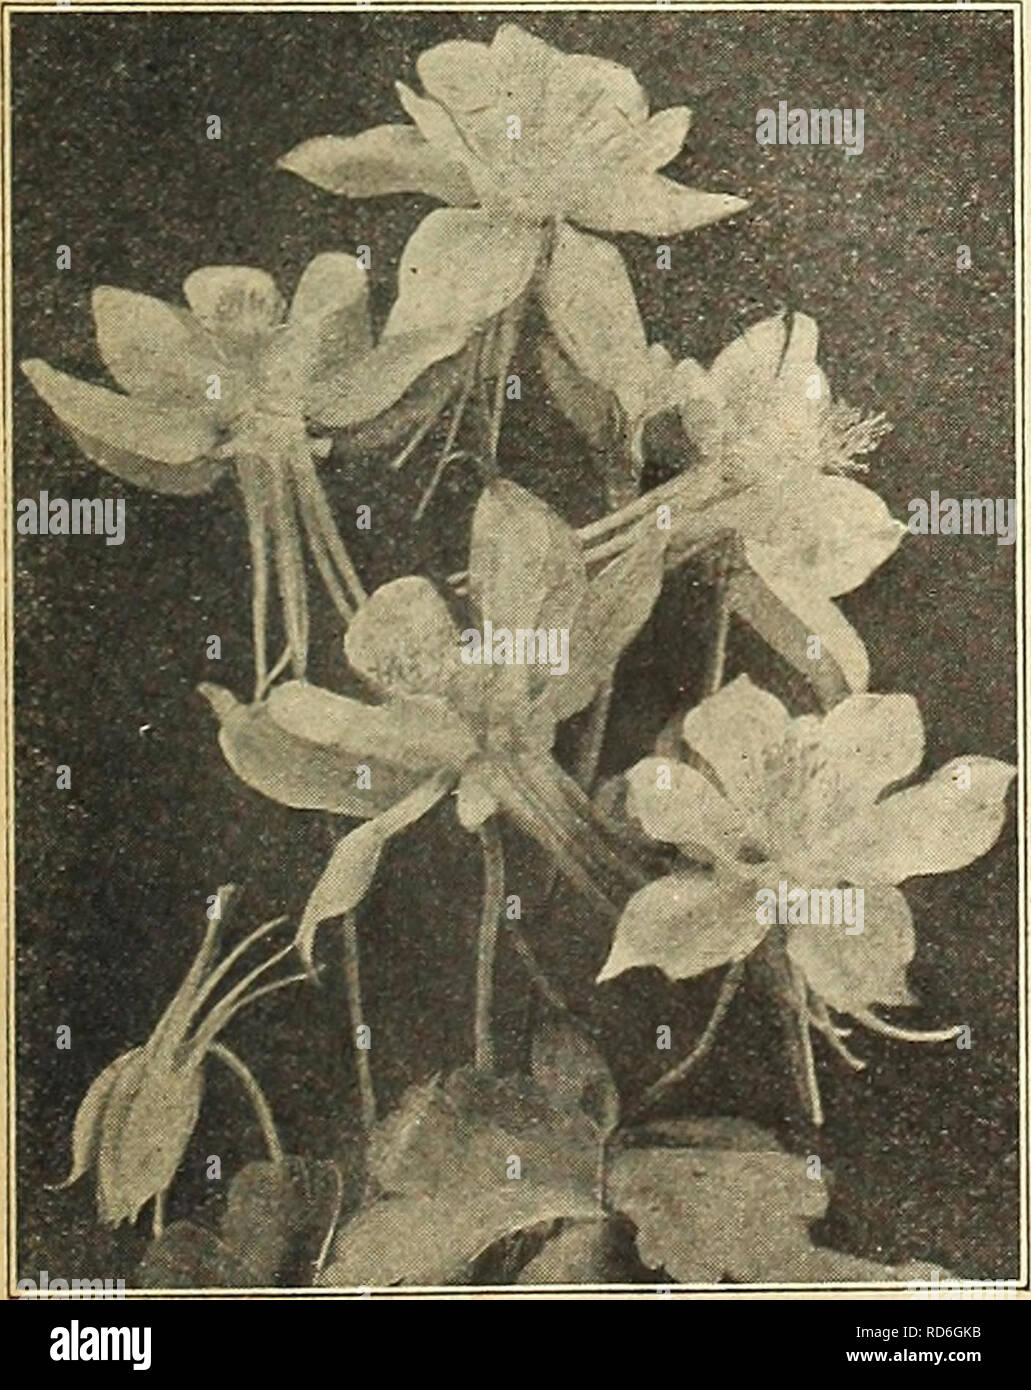 . Currie's farm and garden annual : spring 1921 46th year. Flowers Seeds Catalogs; Bulbs (Plants) Seeds Catalogs; Vegetables Seeds Catalogs; Nurseries (Horticulture) Catalogs; Plants, Ornamental Catalogs; Gardening Equipment and supplies Catalogs. Anemone. CAMPANULA—Bluebells.. Aquilegia. Perhaps the most popular of all border plants. C. Medium (Canterbury Bells)—This strikingly beautiful biennial is an exceed- ingly profuse bloomer, the large bell-shaped flowers in white, pink and shades of blue being very effective. Each 25c; per doz. $2.50. C. Lactiflora Coerulea—Perennial variety. Pale blu Stock Photo